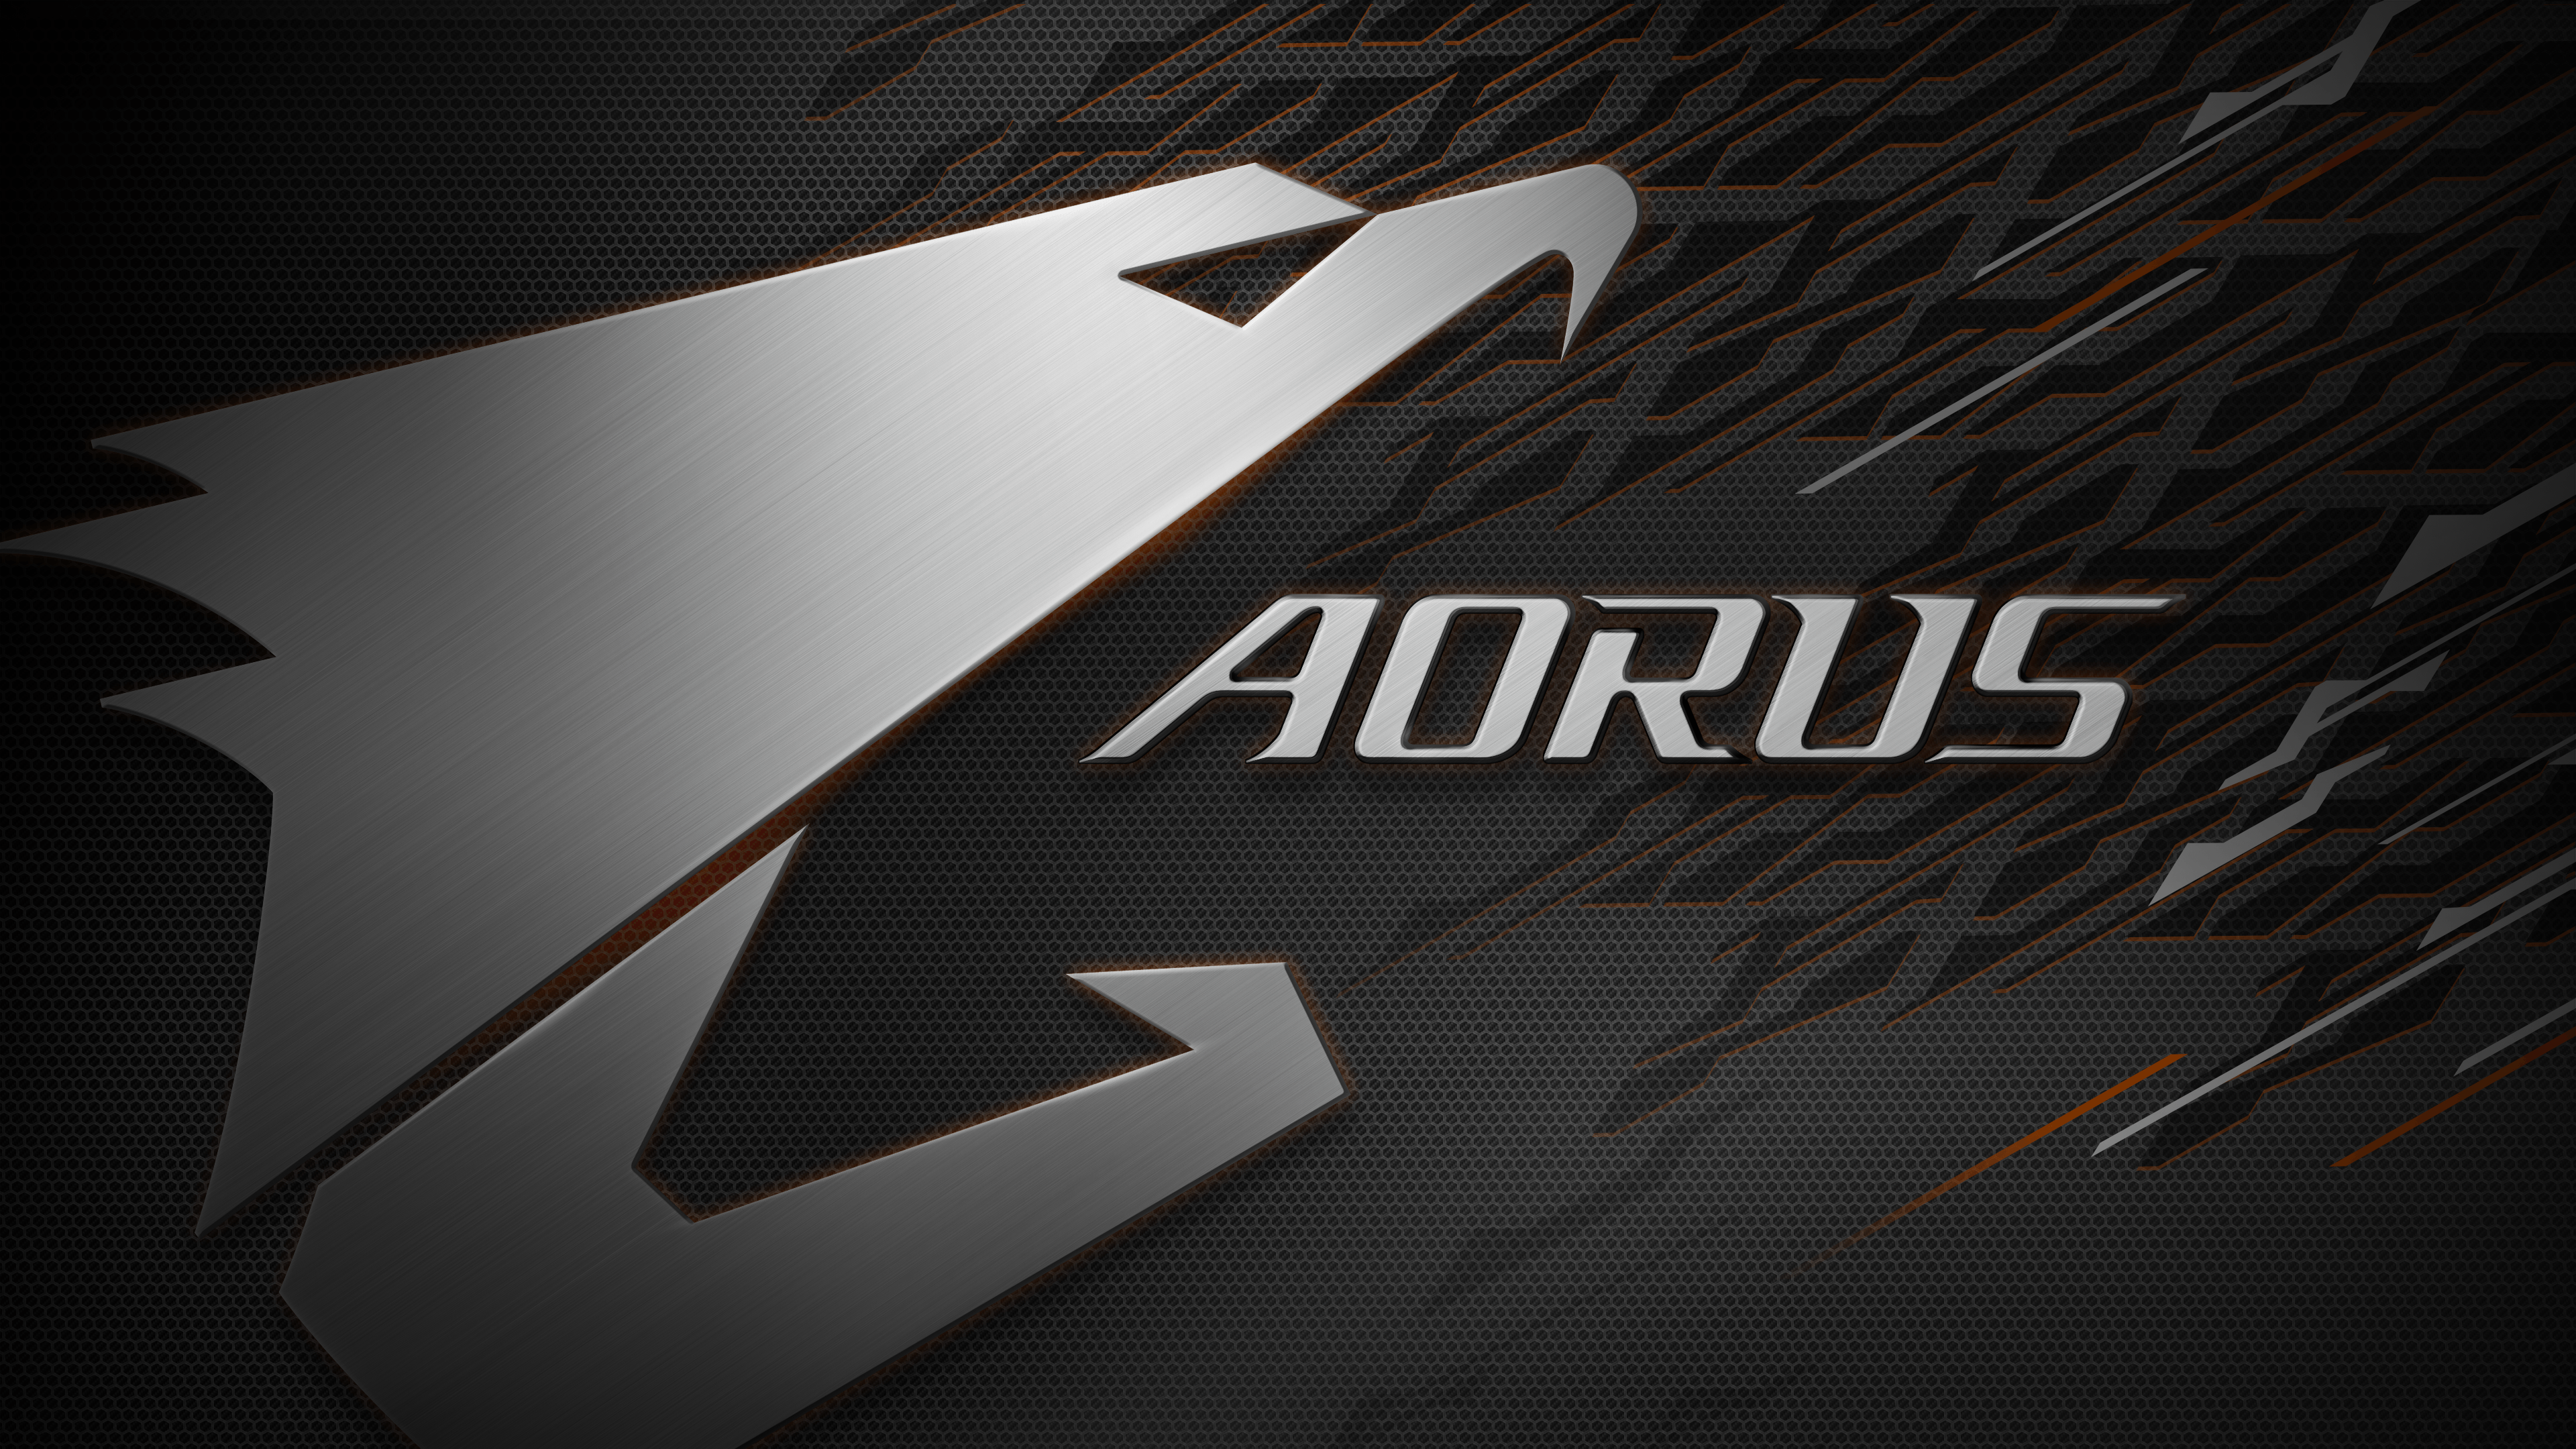 New Gigabyte Logo - AORUS. Enthusiasts' Choice for PC gaming and esports